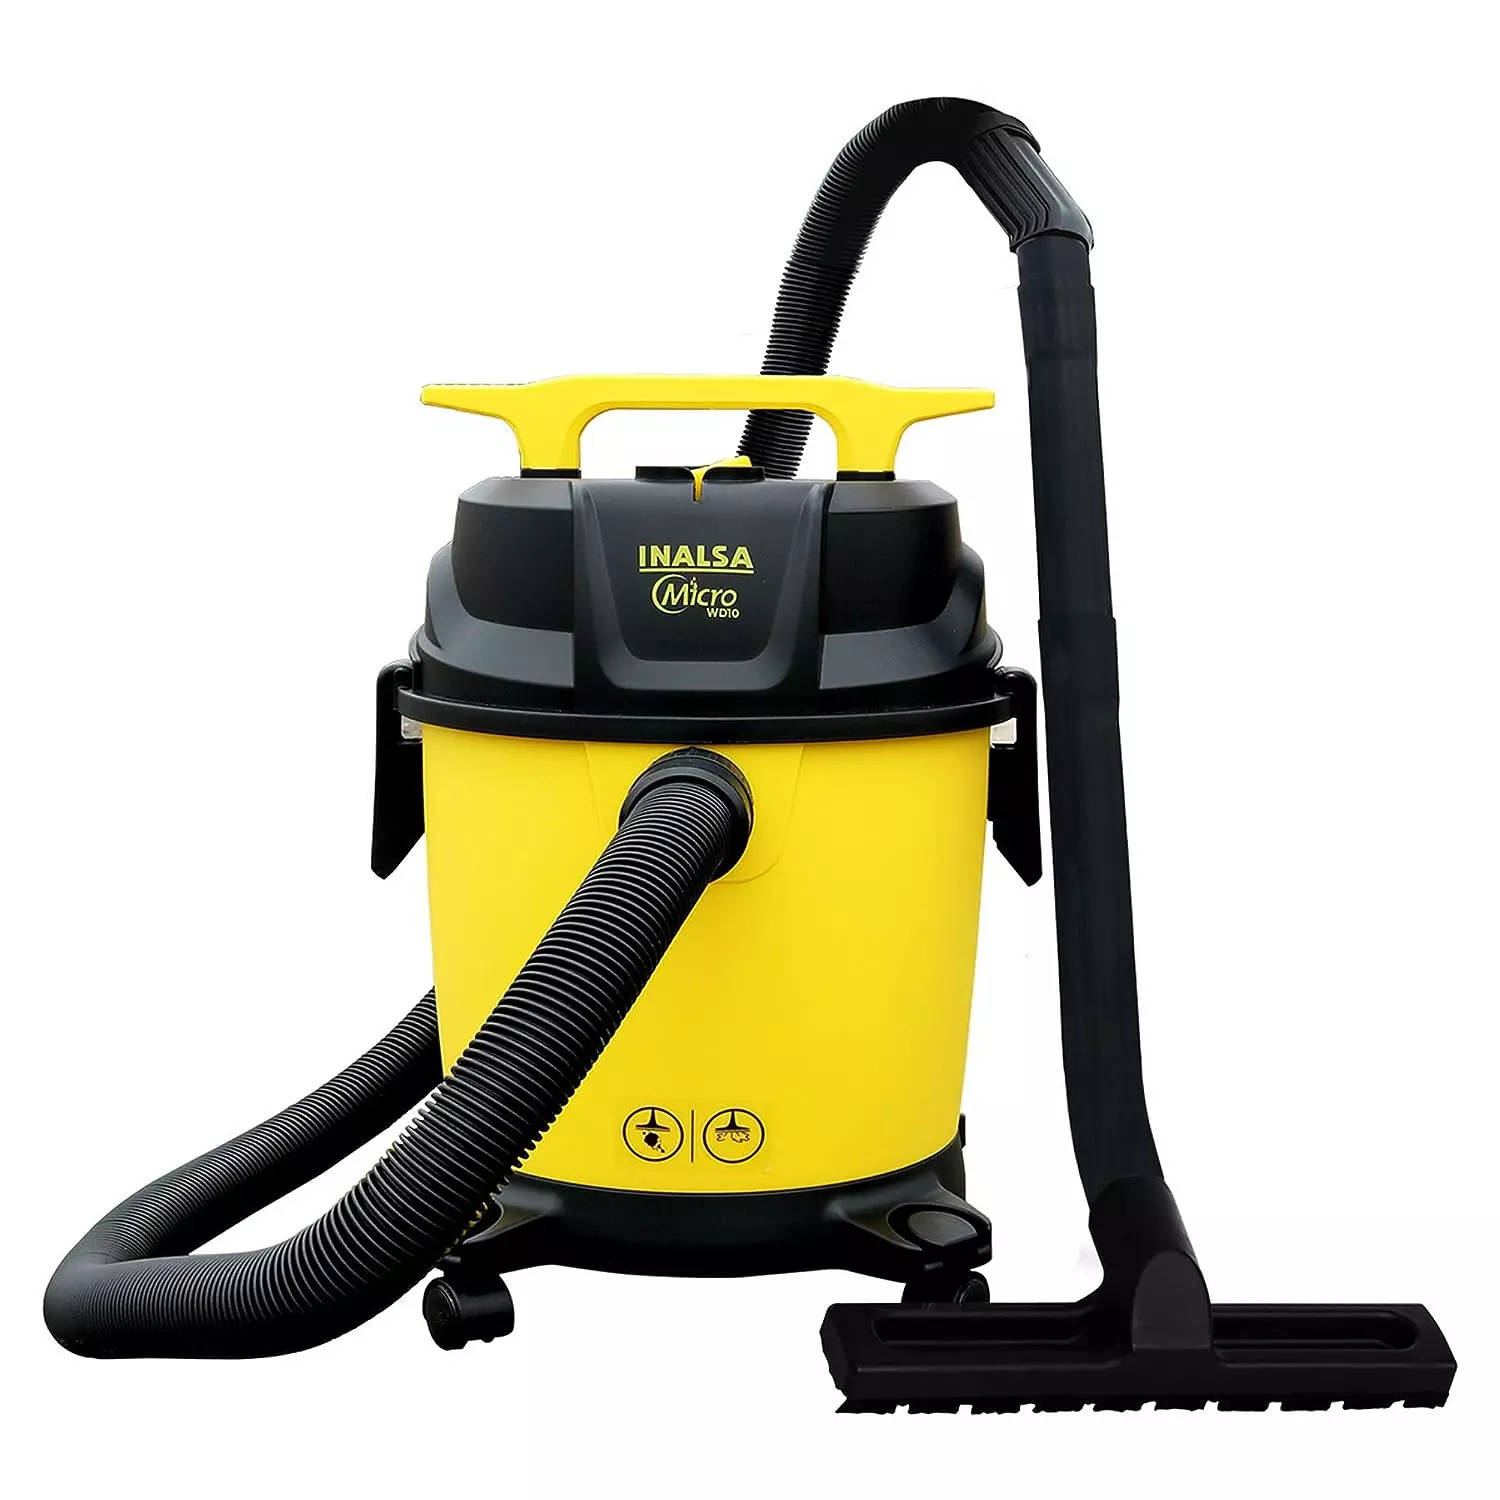 InalsaMicroWD10VacuumCleaner